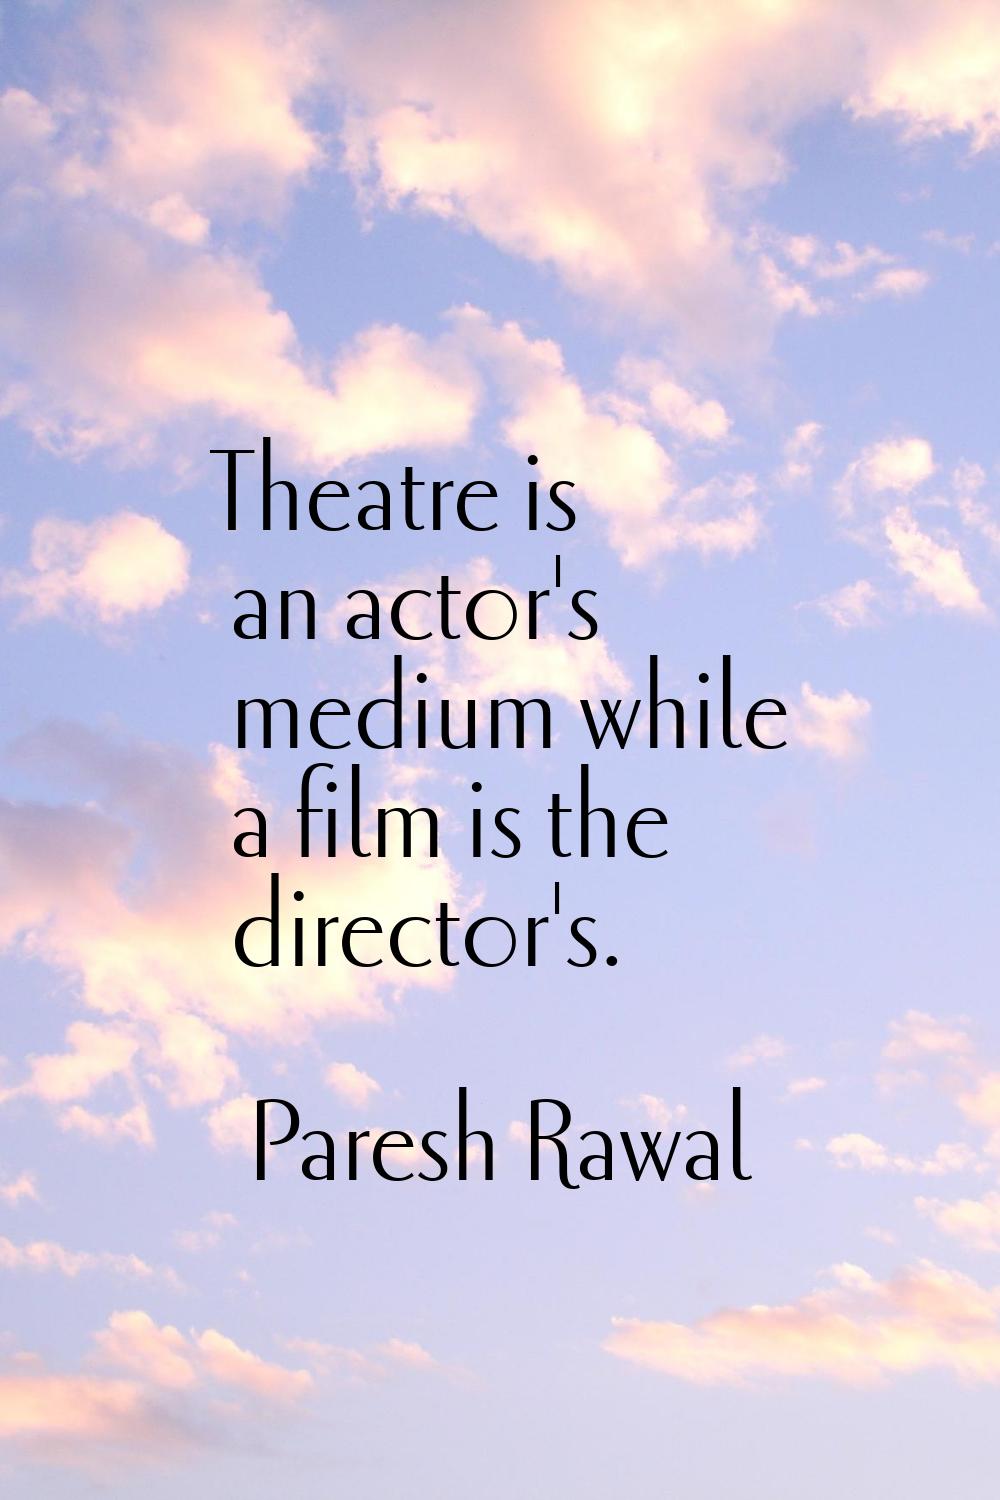 Theatre is an actor's medium while a film is the director's.